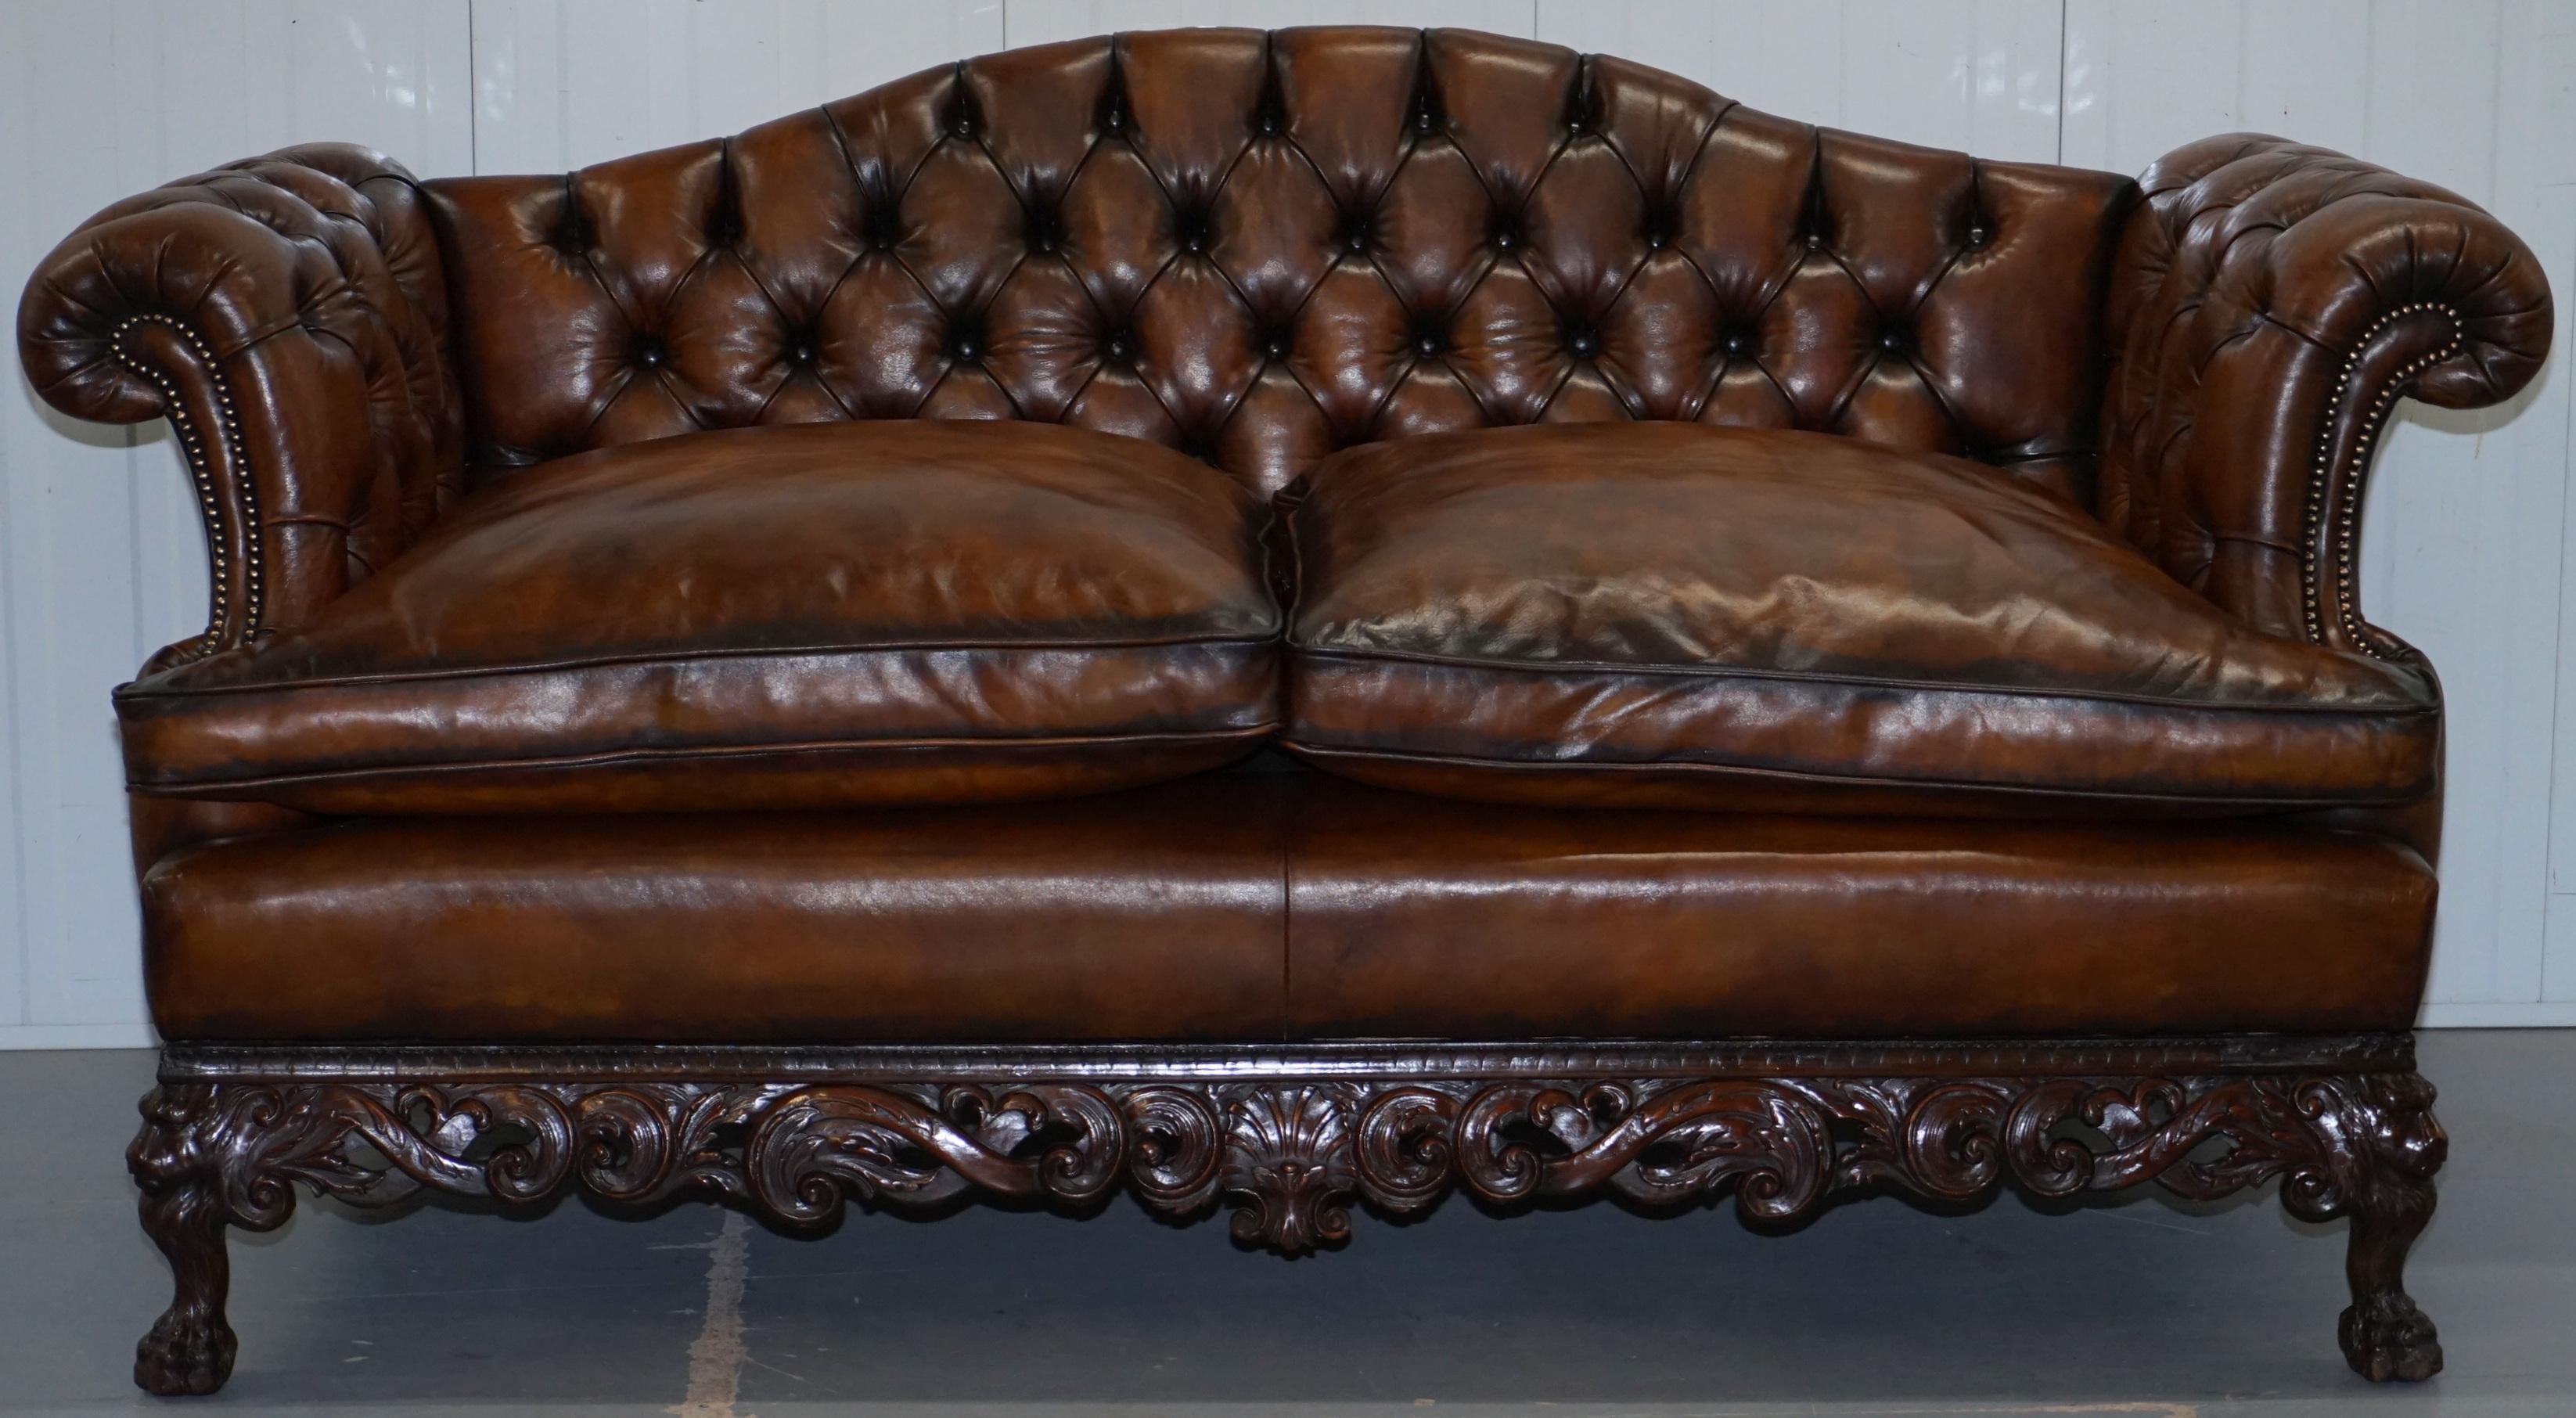 We are delighted to offer for sale this very rare fully restored George II style late Victorian hand carved with Lion hairy paw feet Chesterfield brown leather sofa

Please note the delivery fee listed is just a guide, it covers within the M25